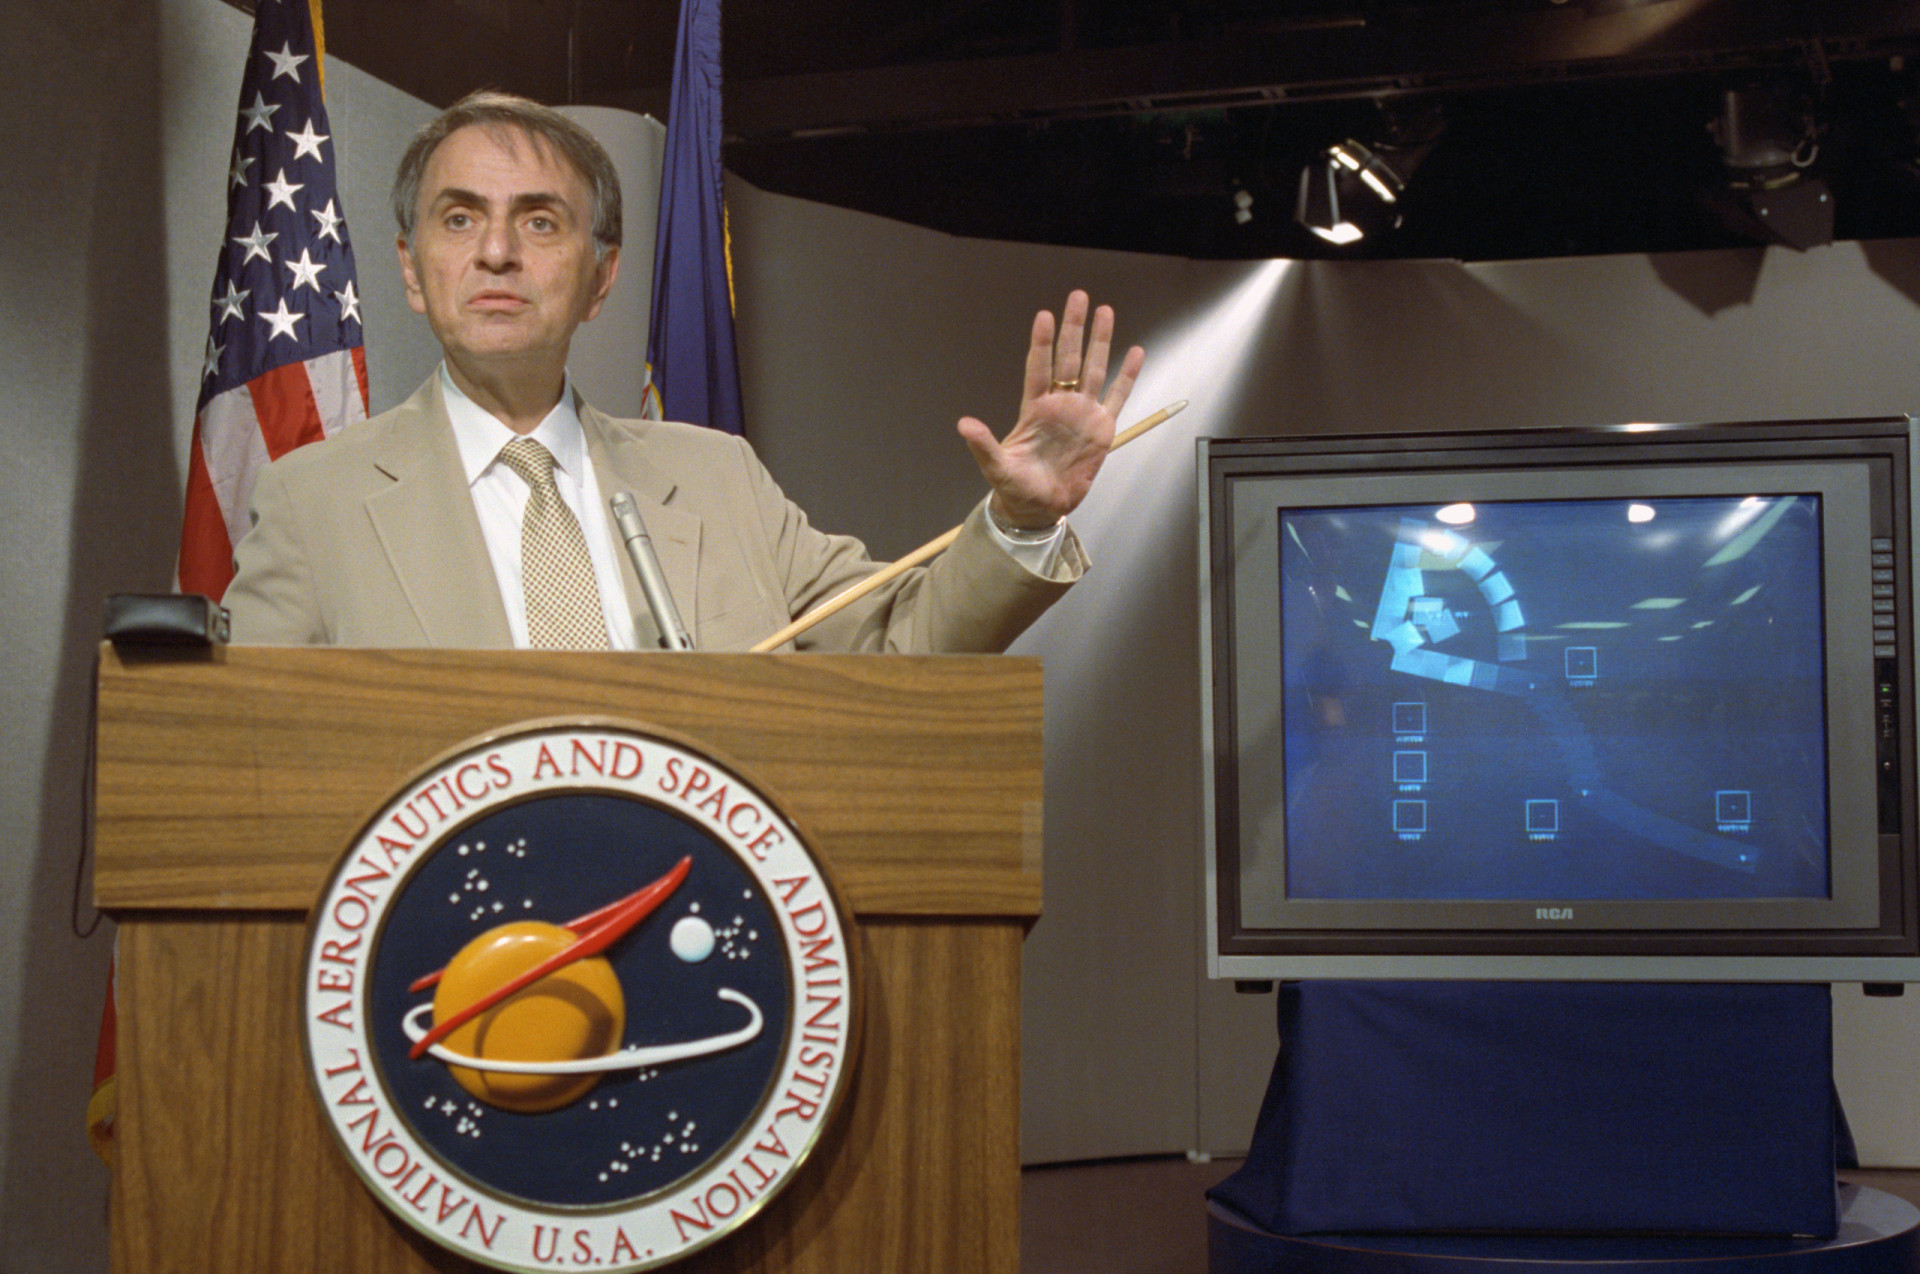 <p>Carl Sagan mentioned the project when he applied for a Miller Institute graduate fellowship at Berkeley in 1959. The project was then mentioned in Sagan's biography published in the '90s.</p><p><a href="https://www.msn.com/en-ph/community/channel/vid-7xx8mnucu55yw63we9va2gwr7uihbxwc68fxqp25x6tg4ftibpra?cvid=94631541bc0f4f89bfd59158d696ad7e">Follow us and access great exclusive content every day</a></p>